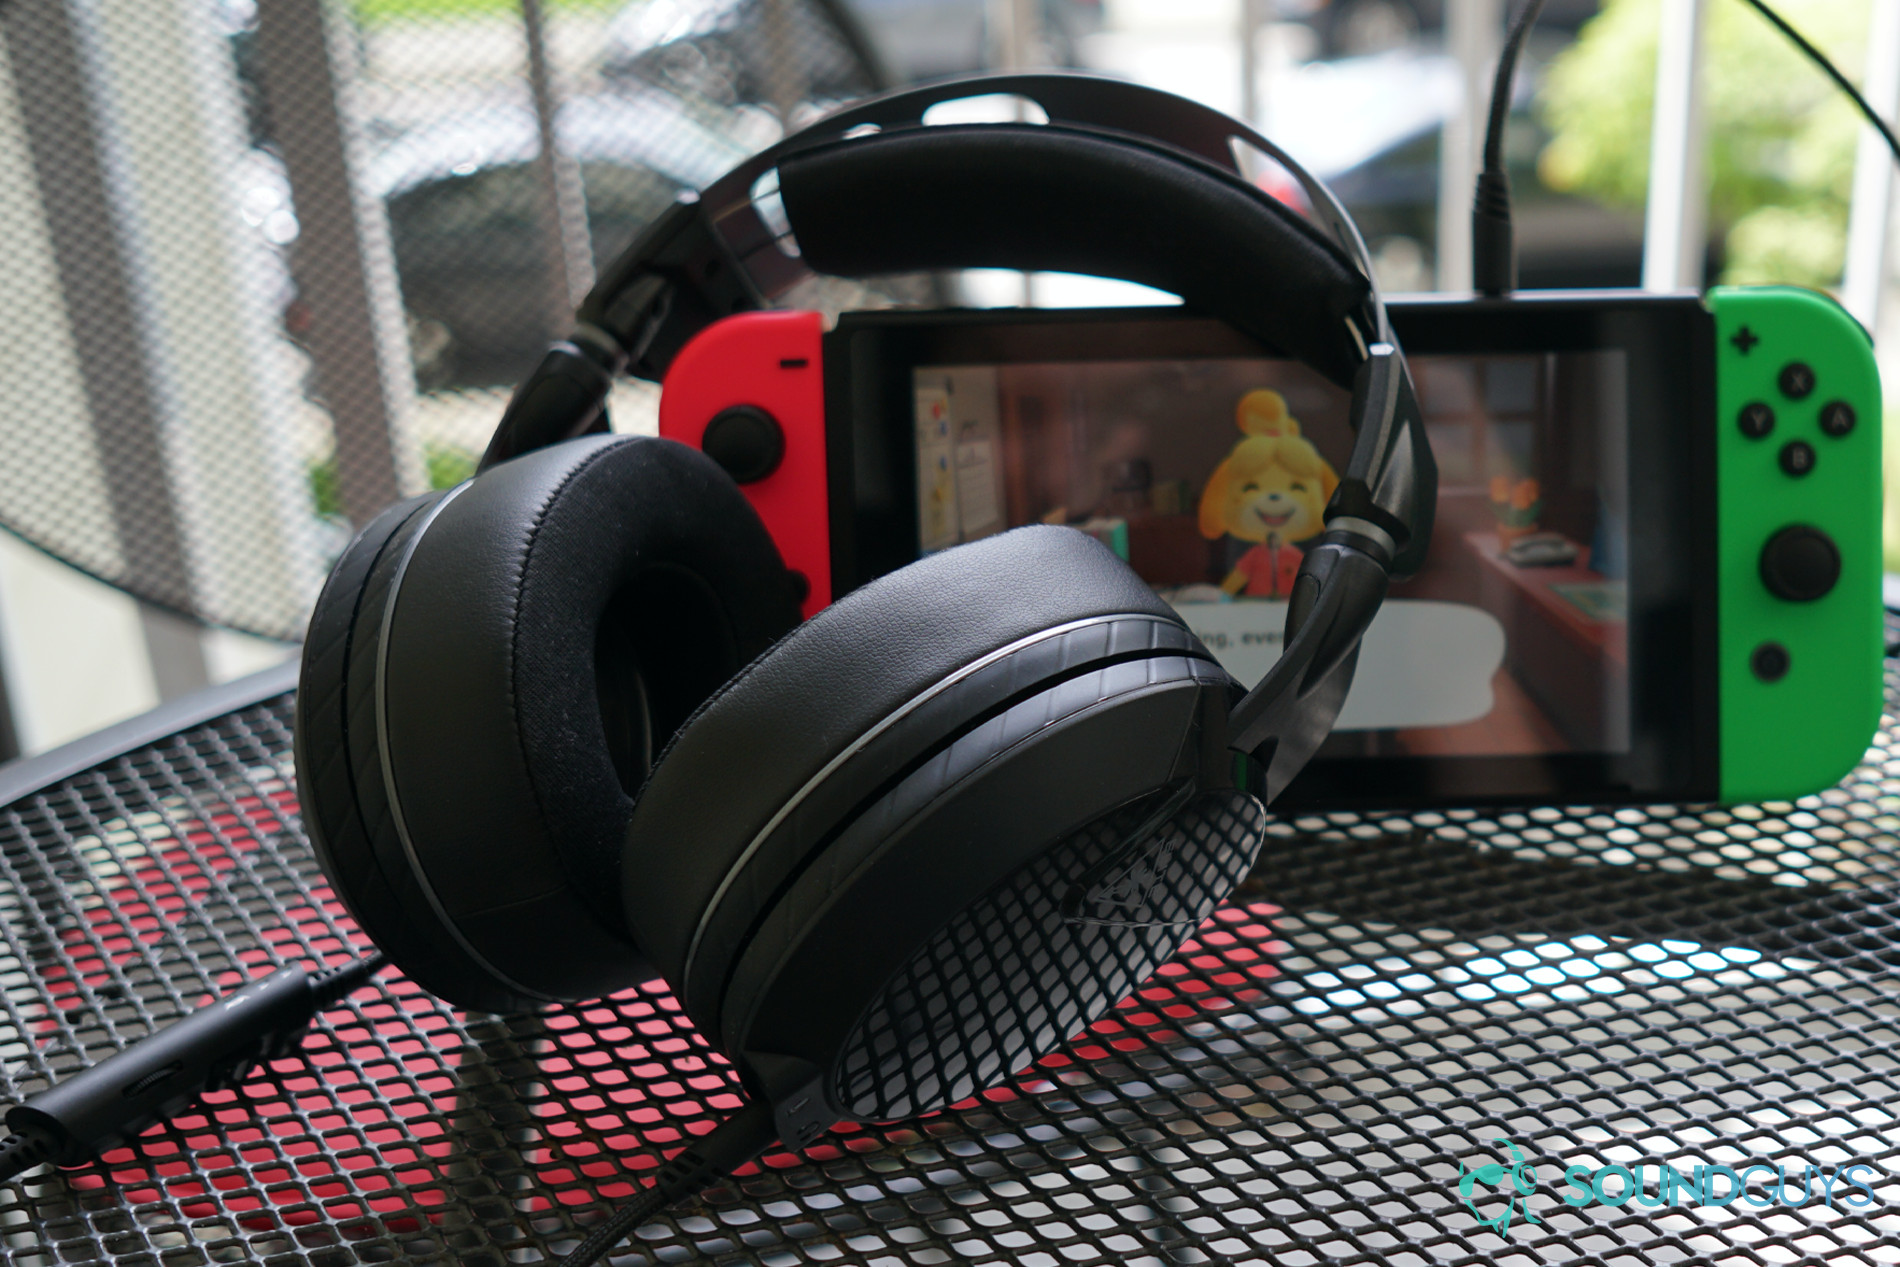 The Turtle Beach Elite Atlas gaming headset leans on a Nintendo Switch running Animal Crossing: New Horizons.